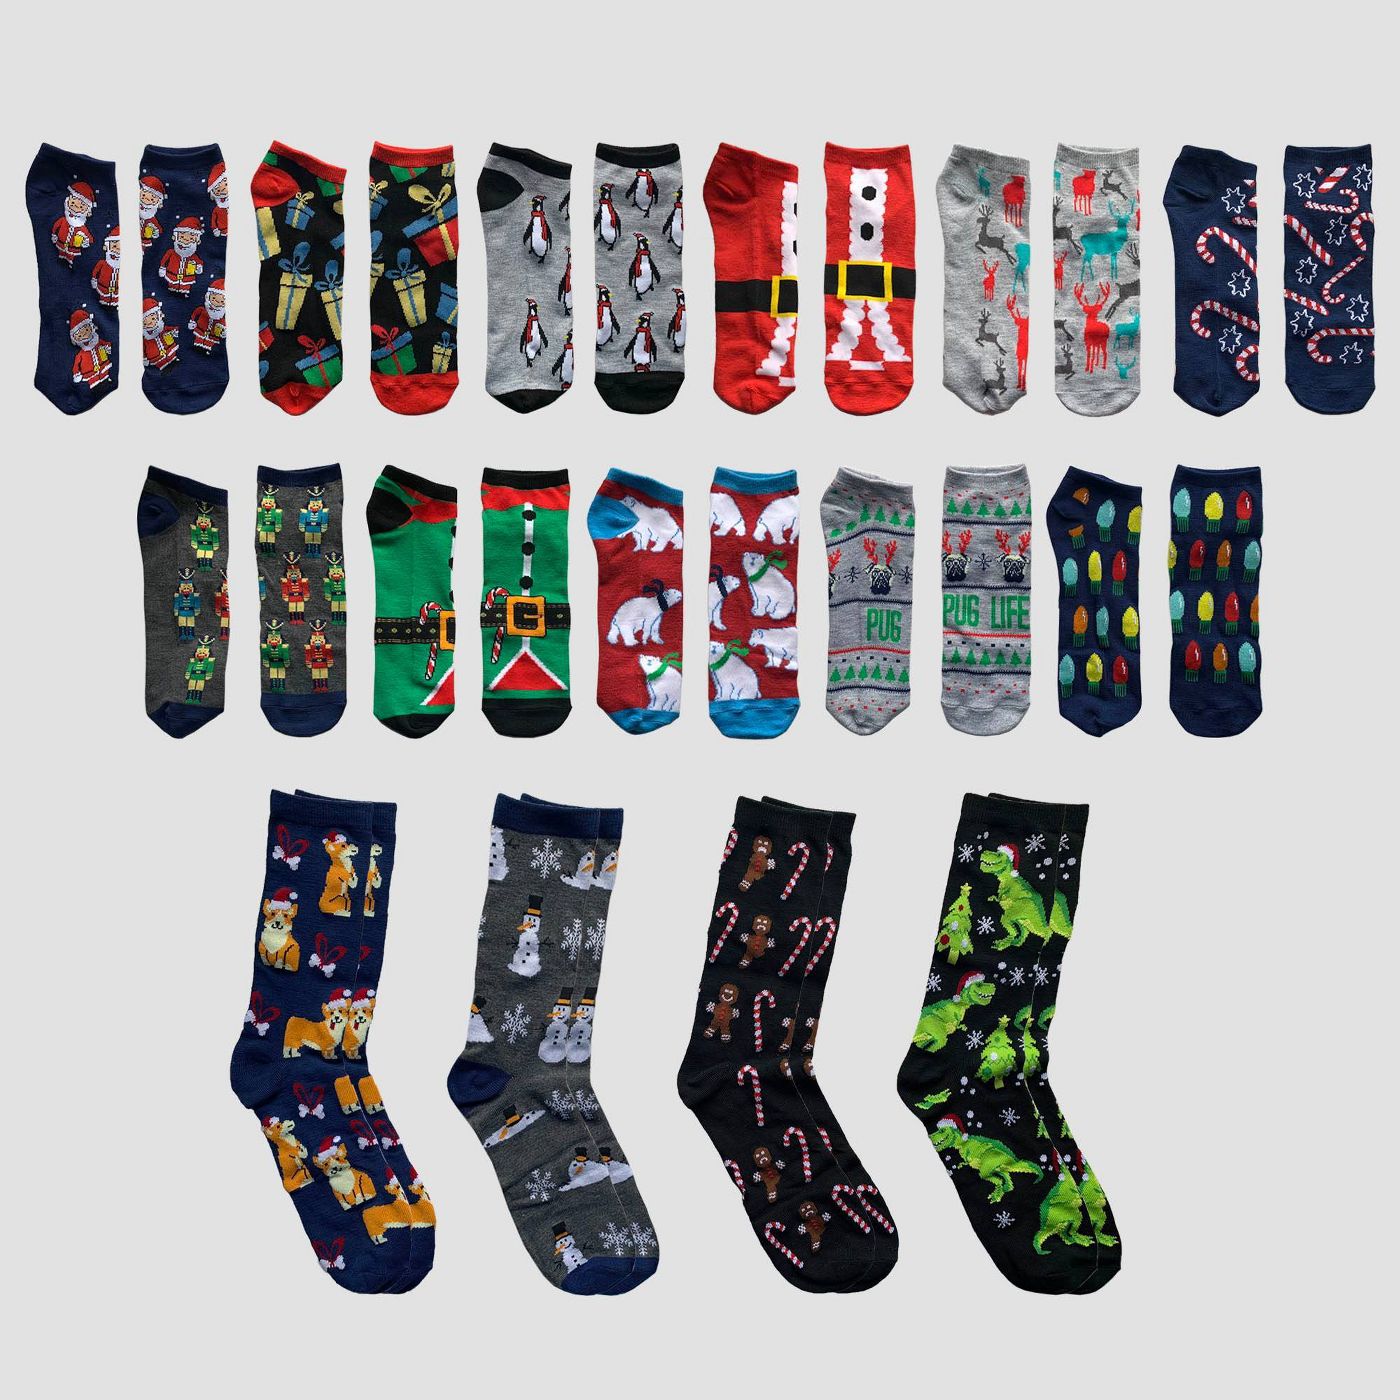 Men's Holiday Fun 15 Days of Socks Advent Calendar - Assorted Colors One Size - image 1 of 4